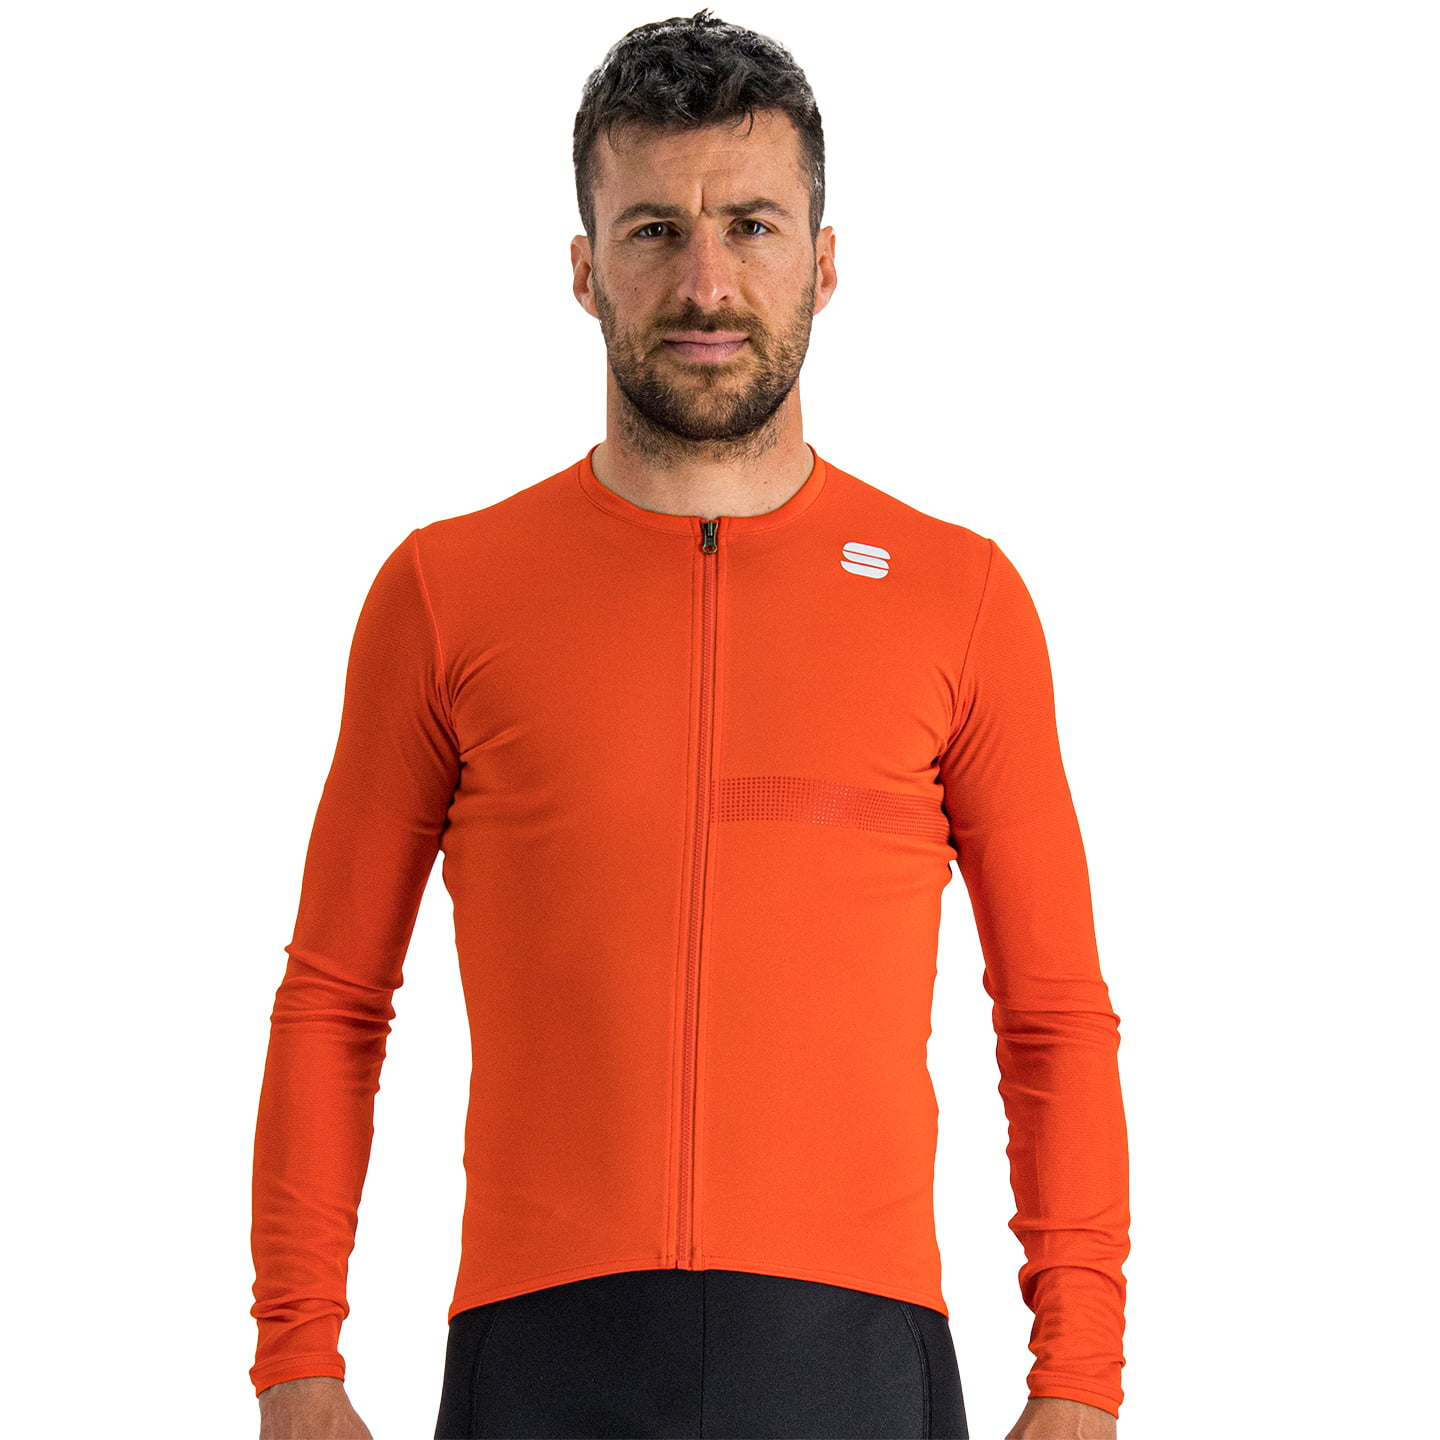 SPORTFUL Matchy Long Sleeve Jersey Long Sleeve Jersey, for men, size XL, Cycling jersey, Cycle clothing